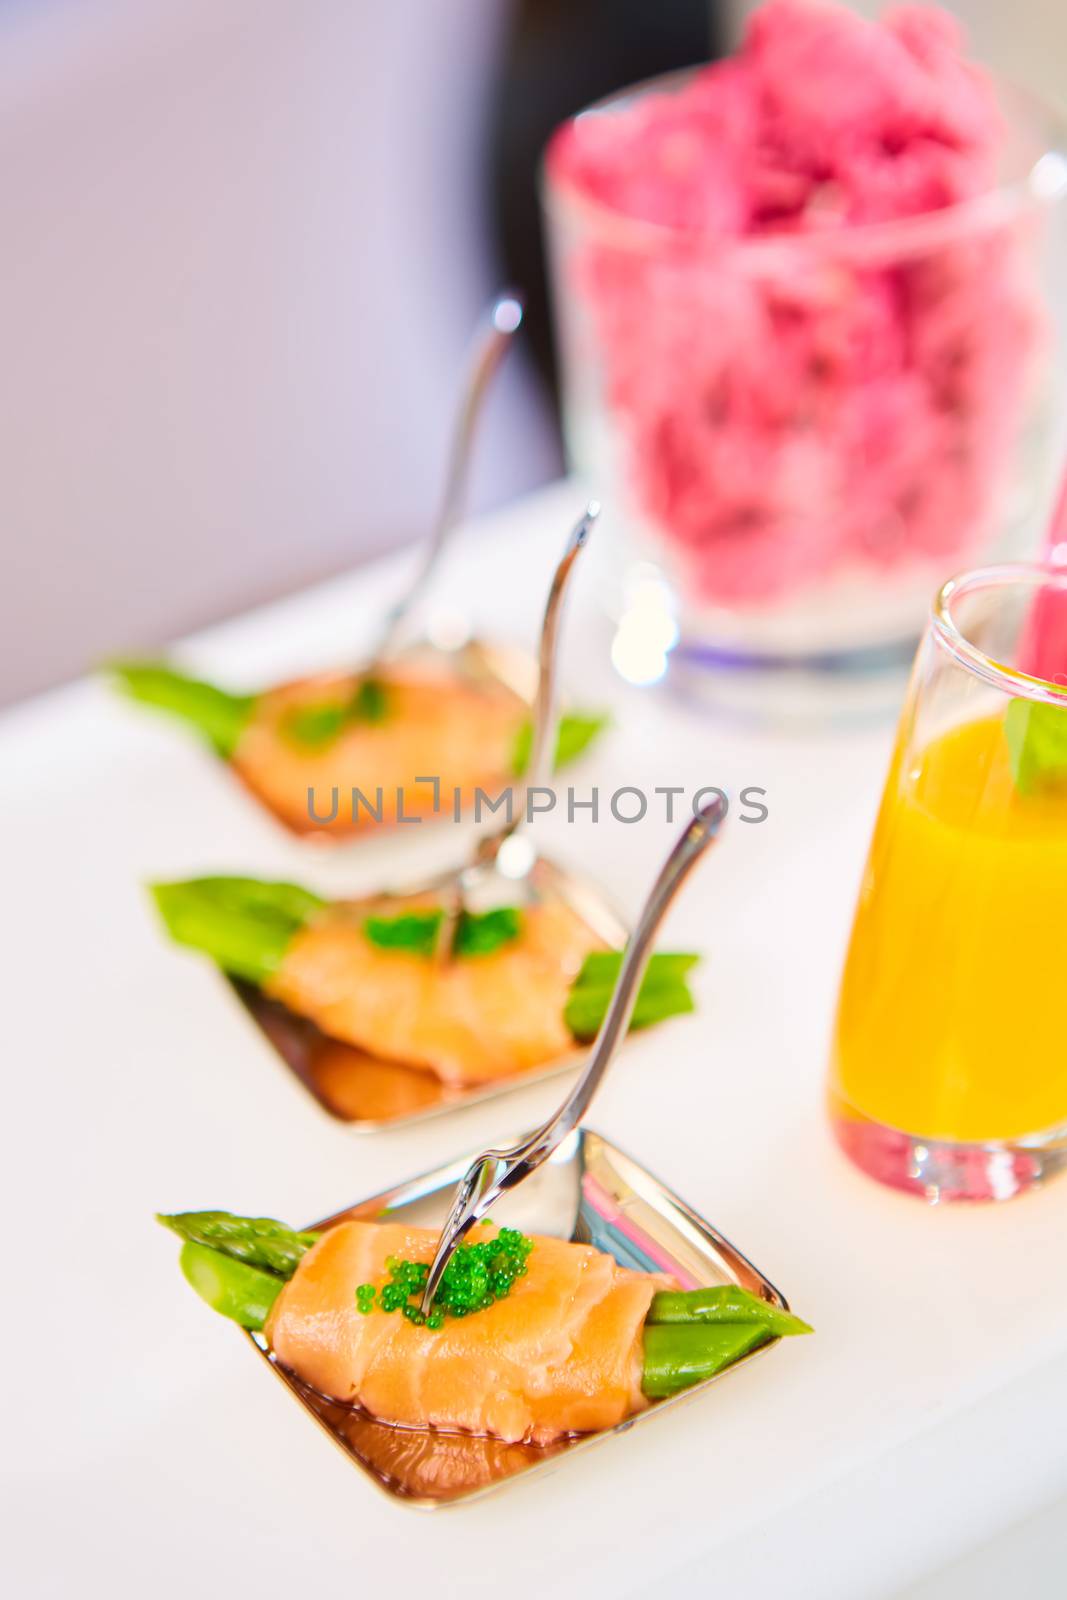 Appetizer plate of sauteed asparagus wrapped in thin slices smoked salmon by sarymsakov